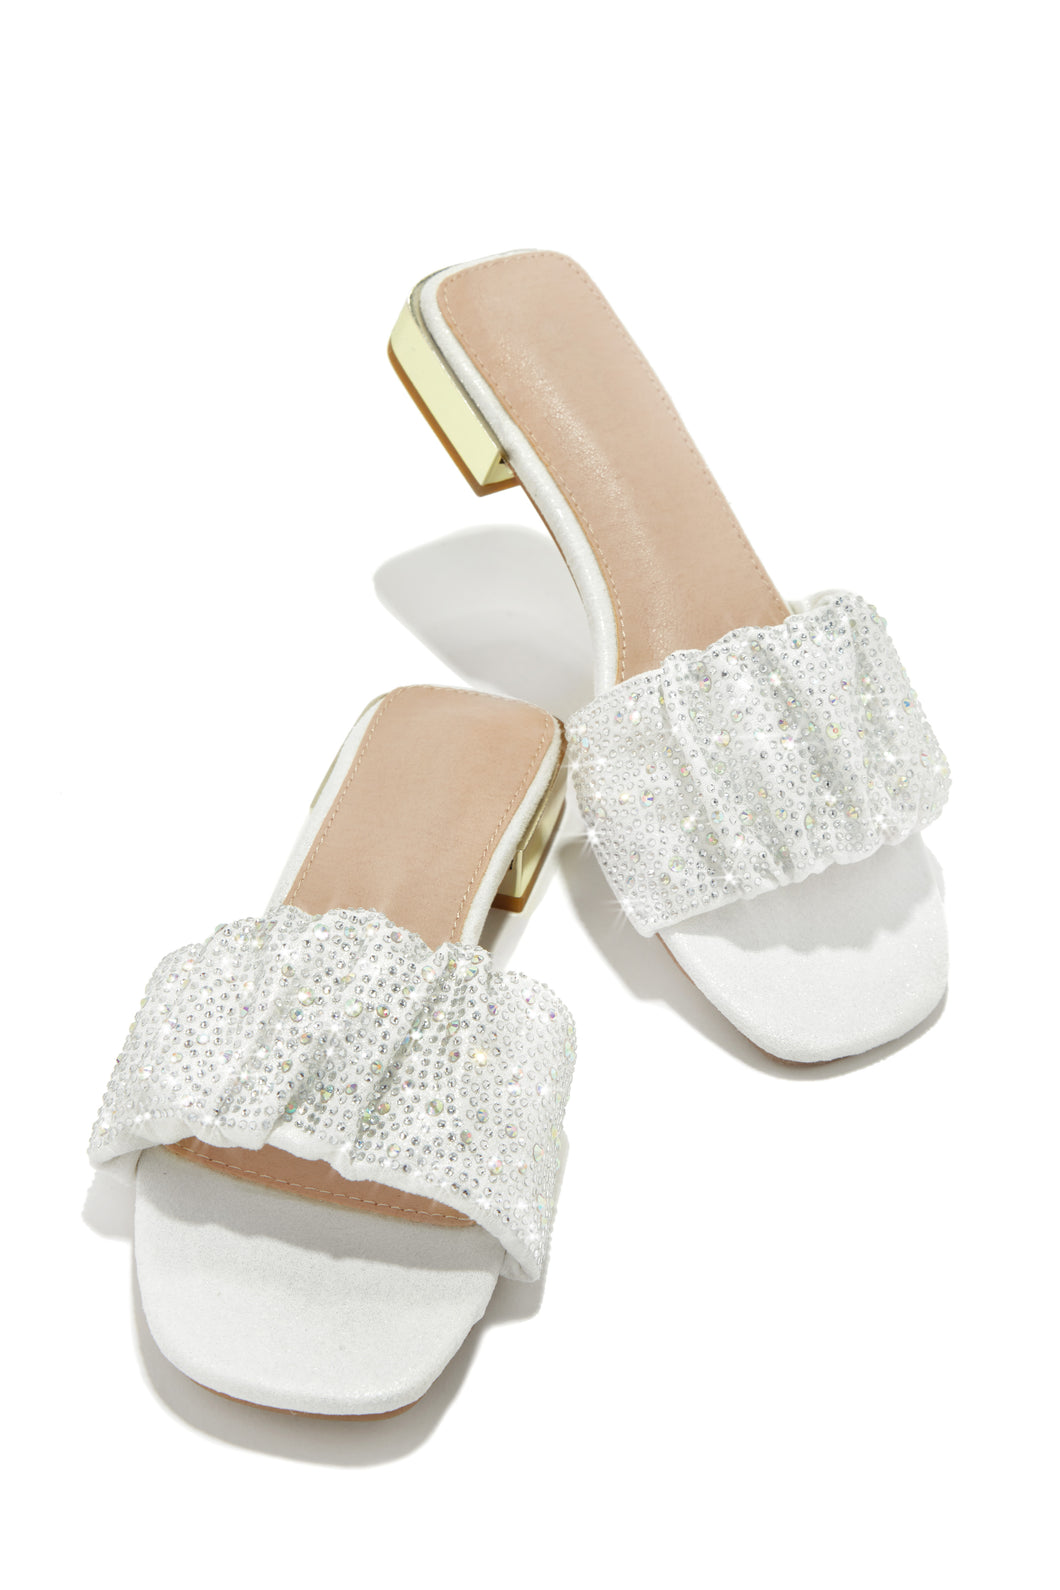 White Sandals With Embellishment On Strap